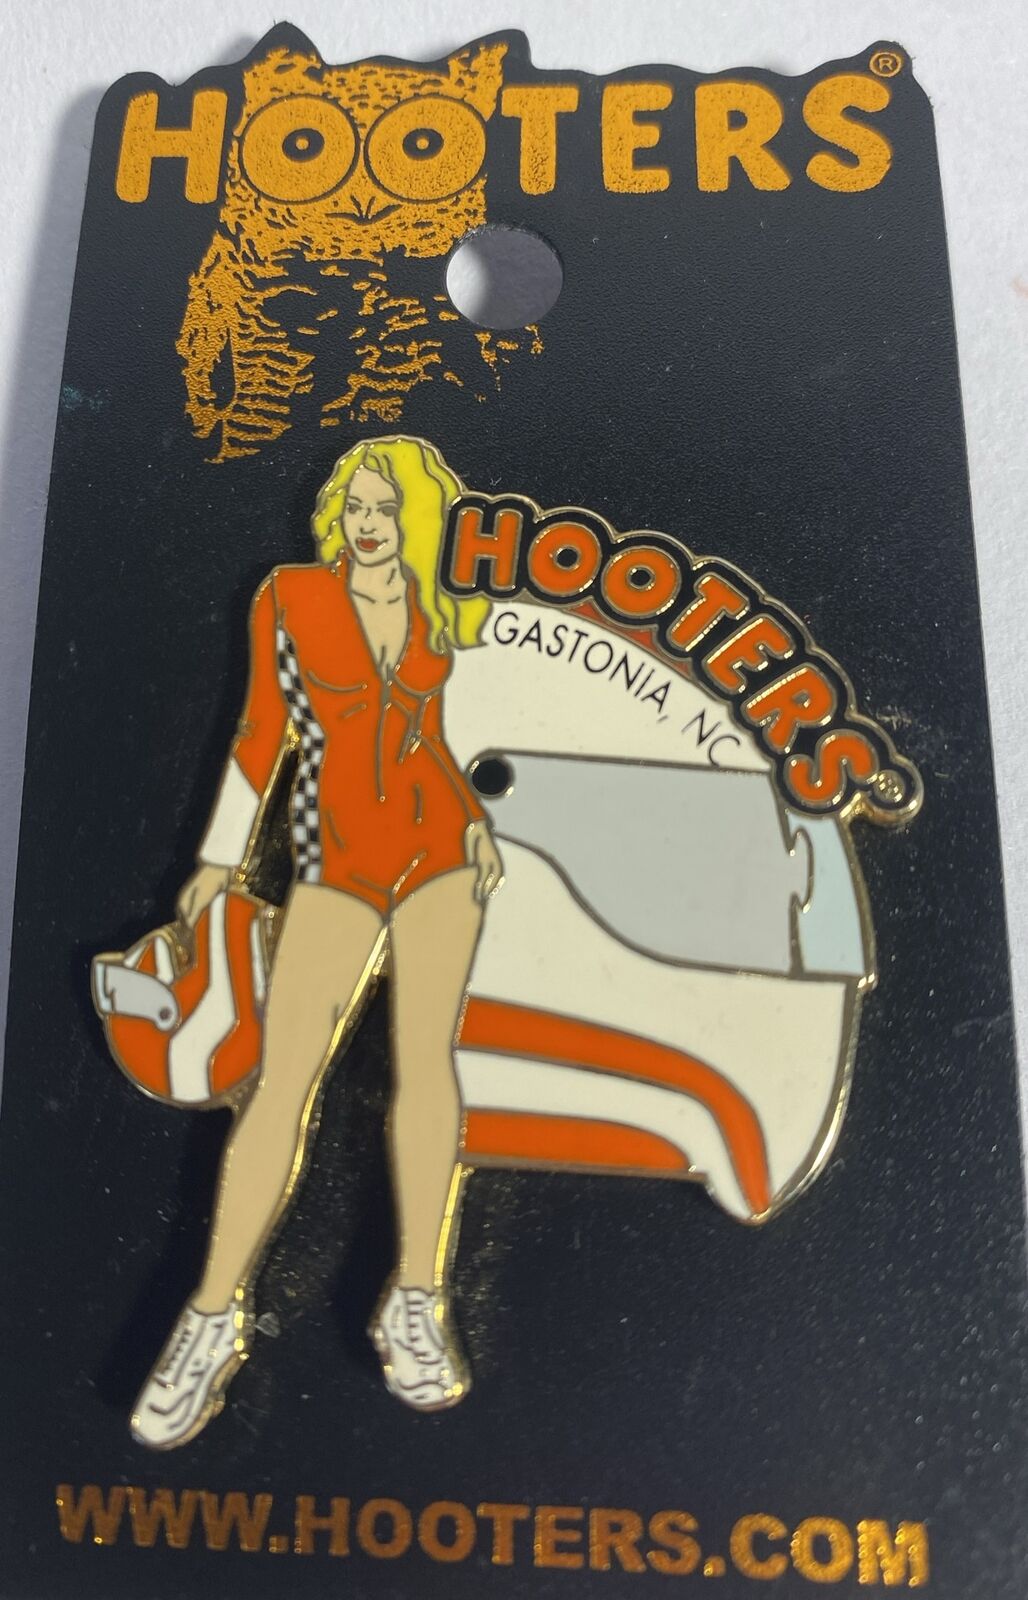 HOOTERS Gastonia NC Racing Waitress Holding Helmet Collectable Pin. New FastShip